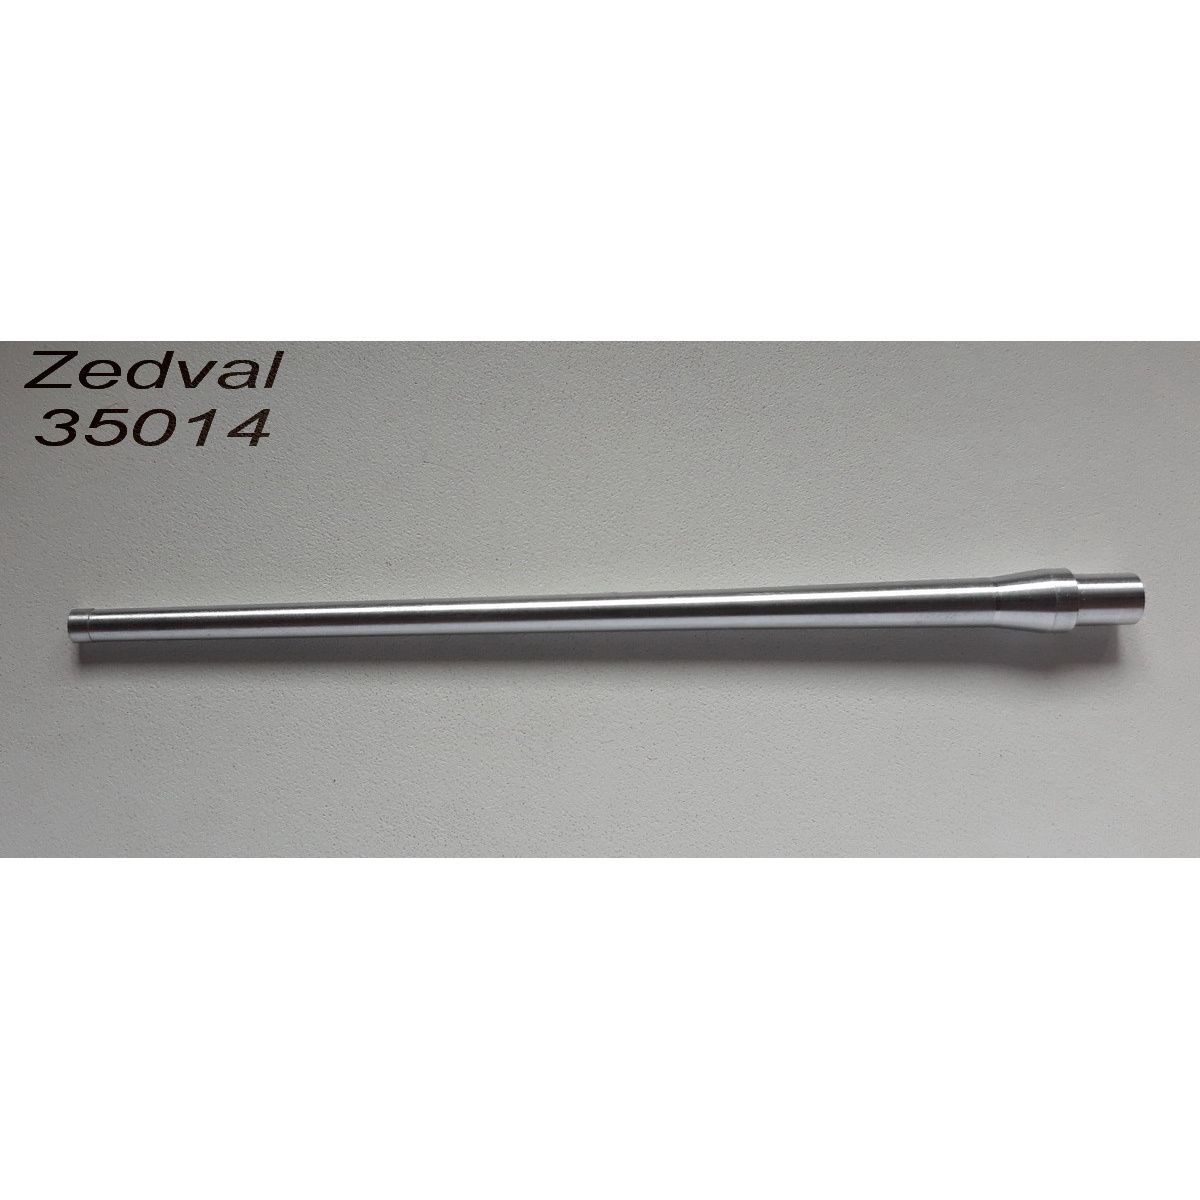 Zedval 1/35 35014 trunk 100 mm D-10S of the su-100. The barrel with rifling